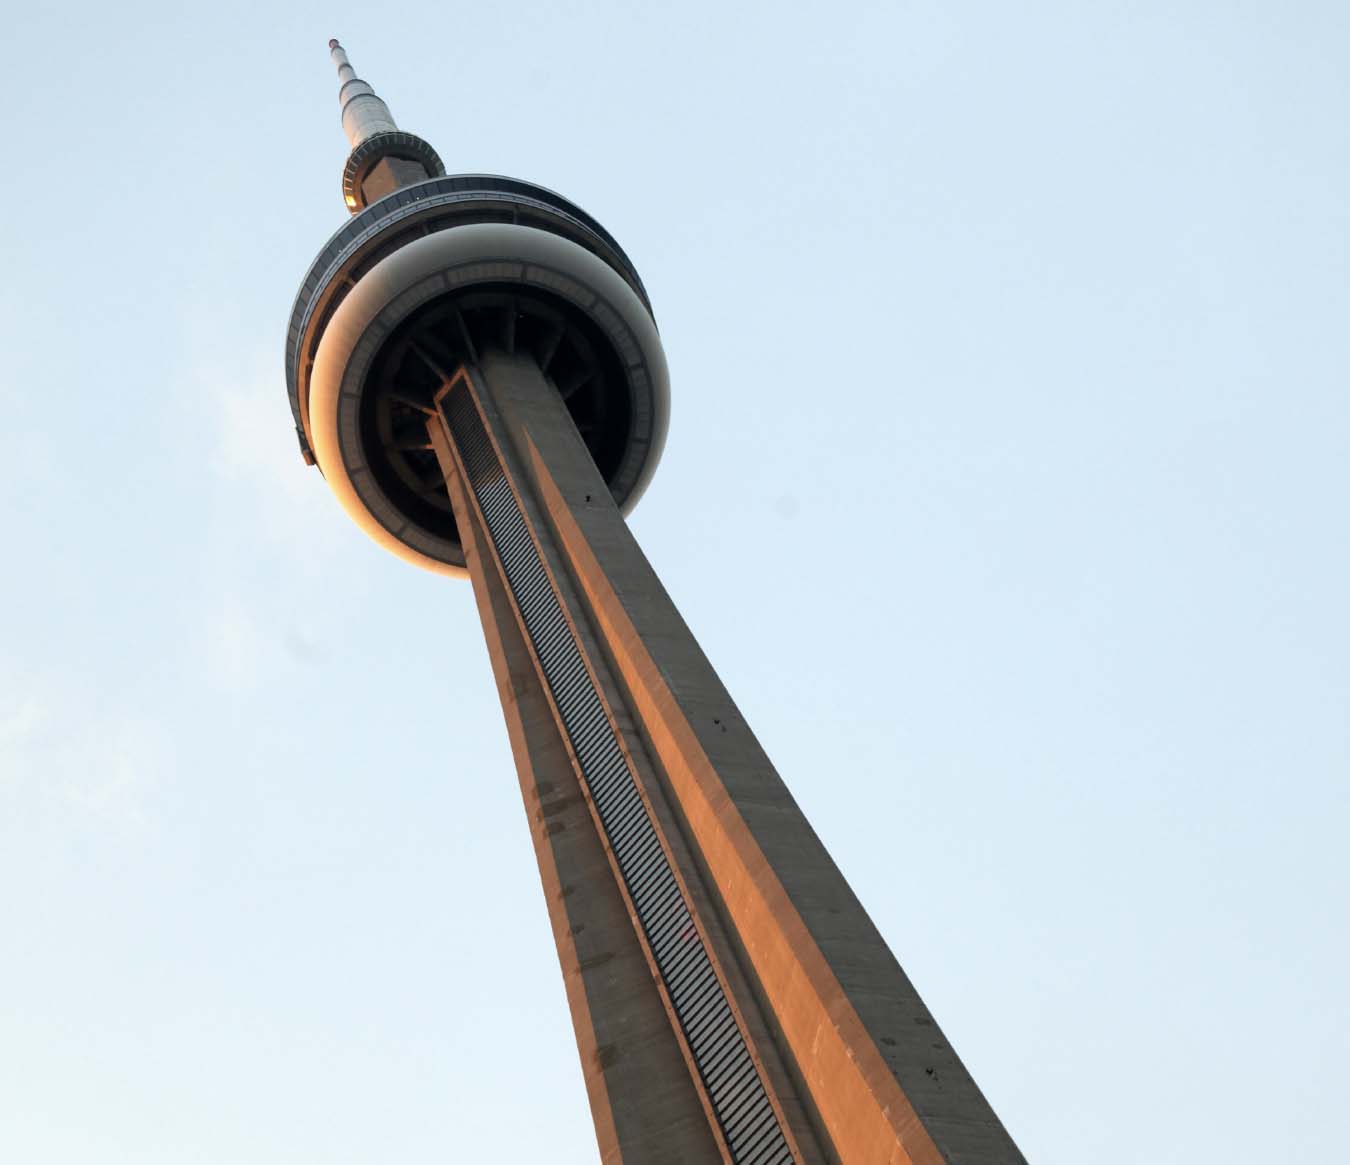 Things to Do in Toronto - CN Tower